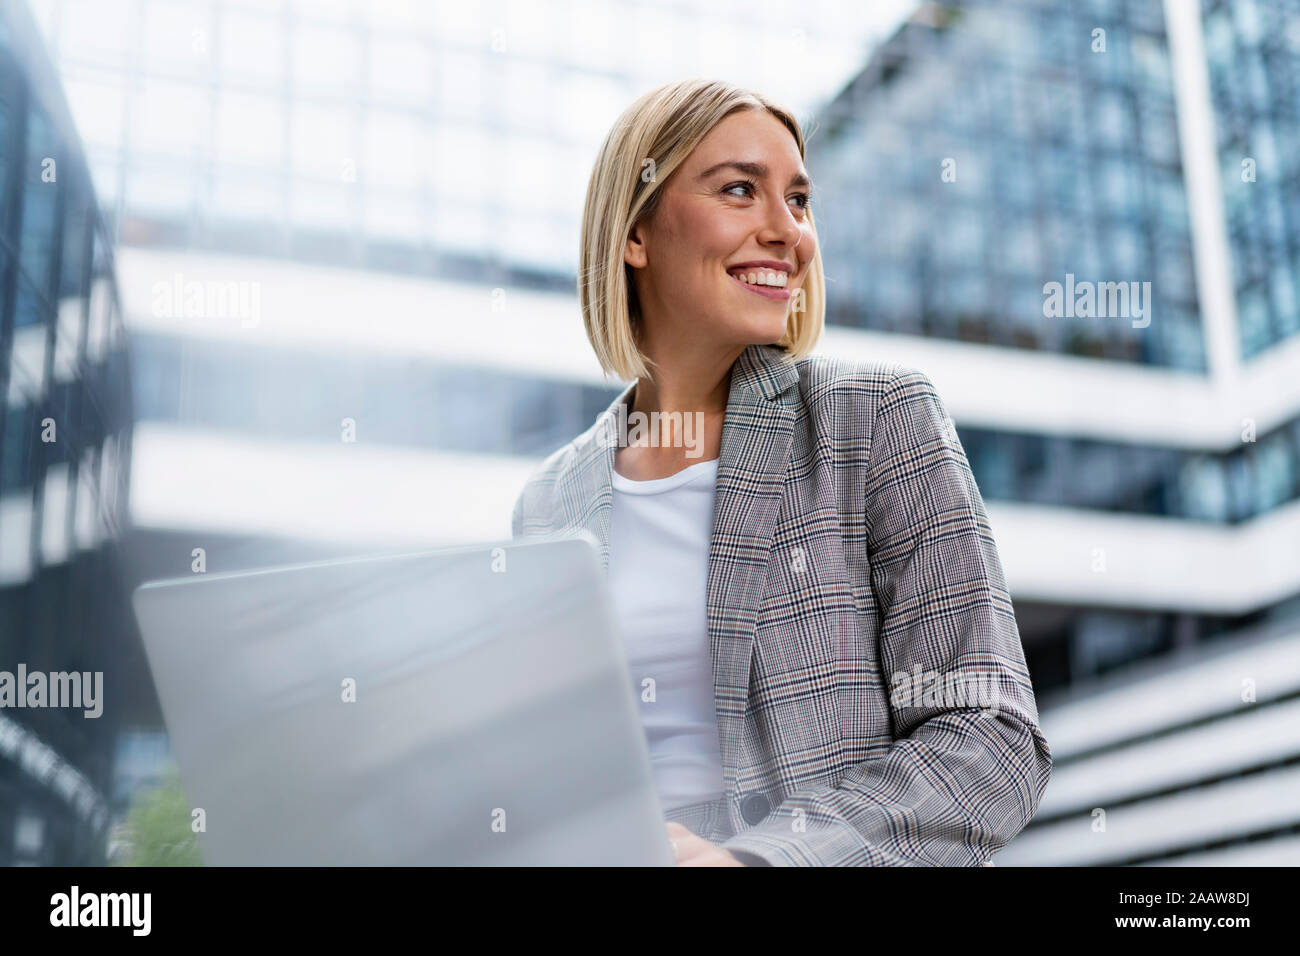 Smiling young businesswoman using laptop in the city Stock Photo